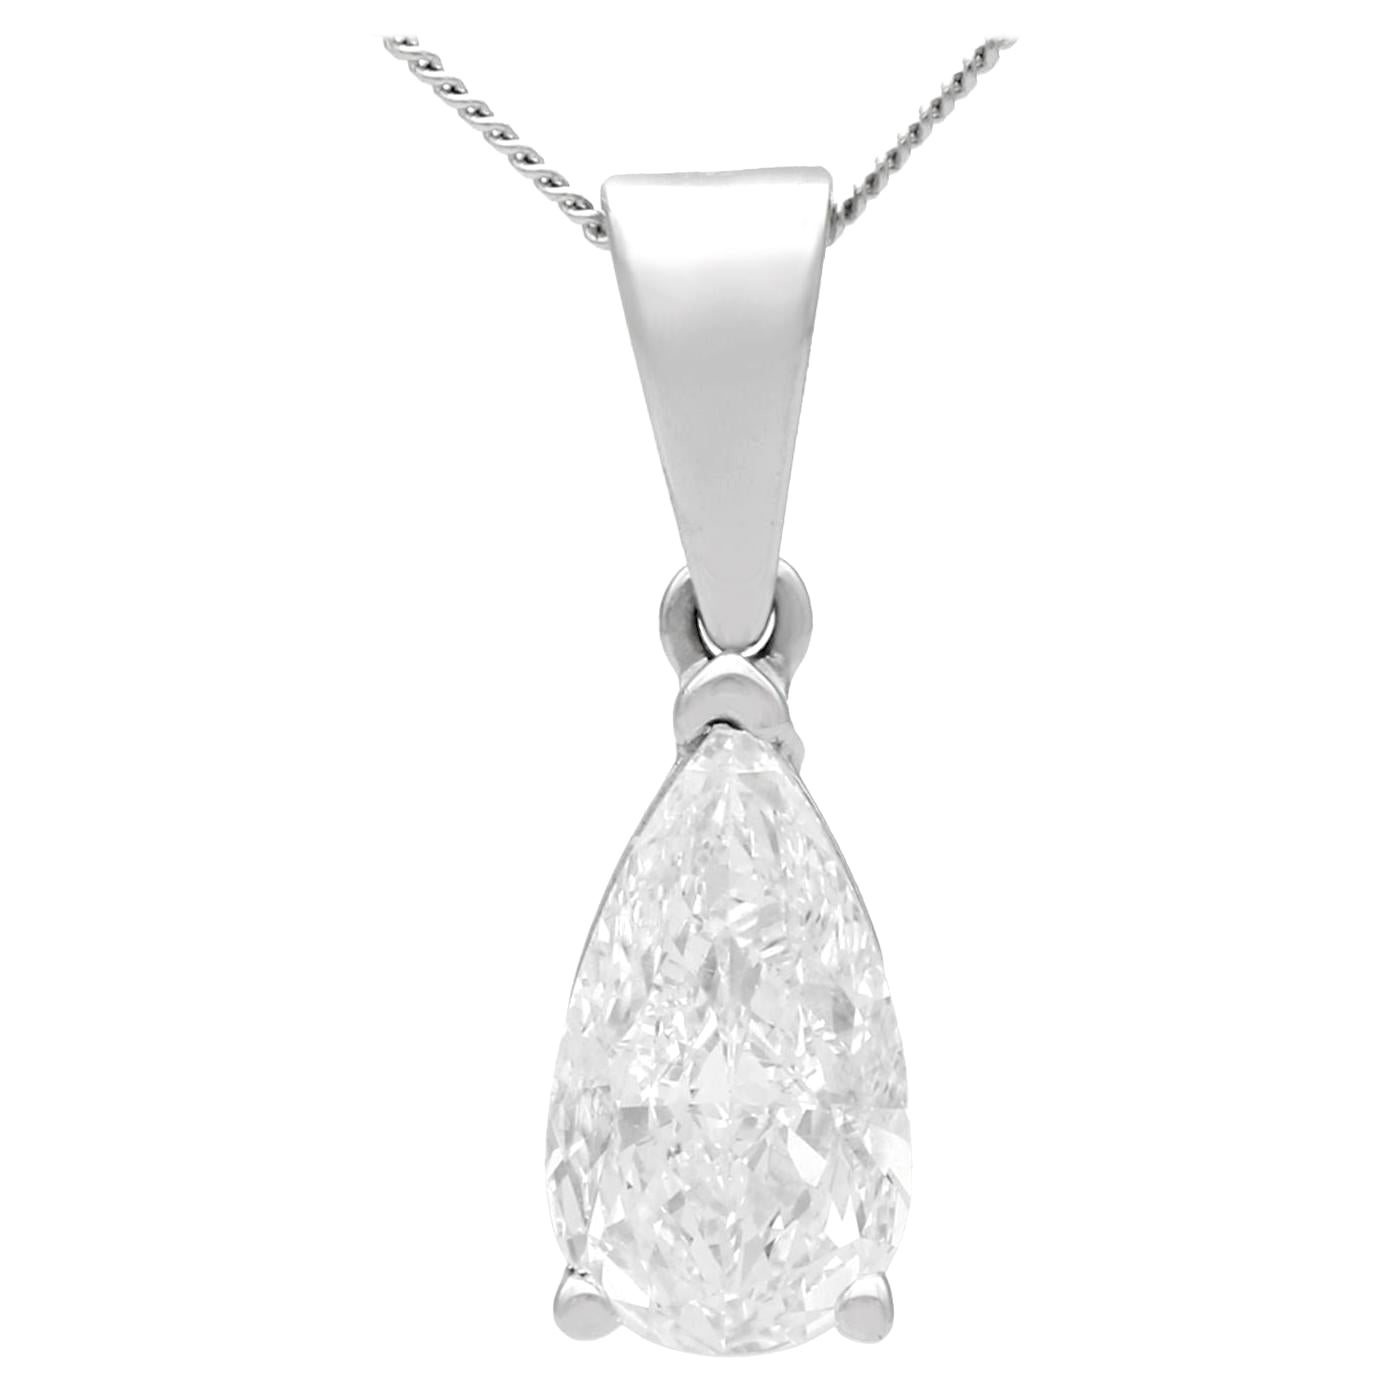 Contemporary French 1.02 Carat Diamond and White Gold Pendant